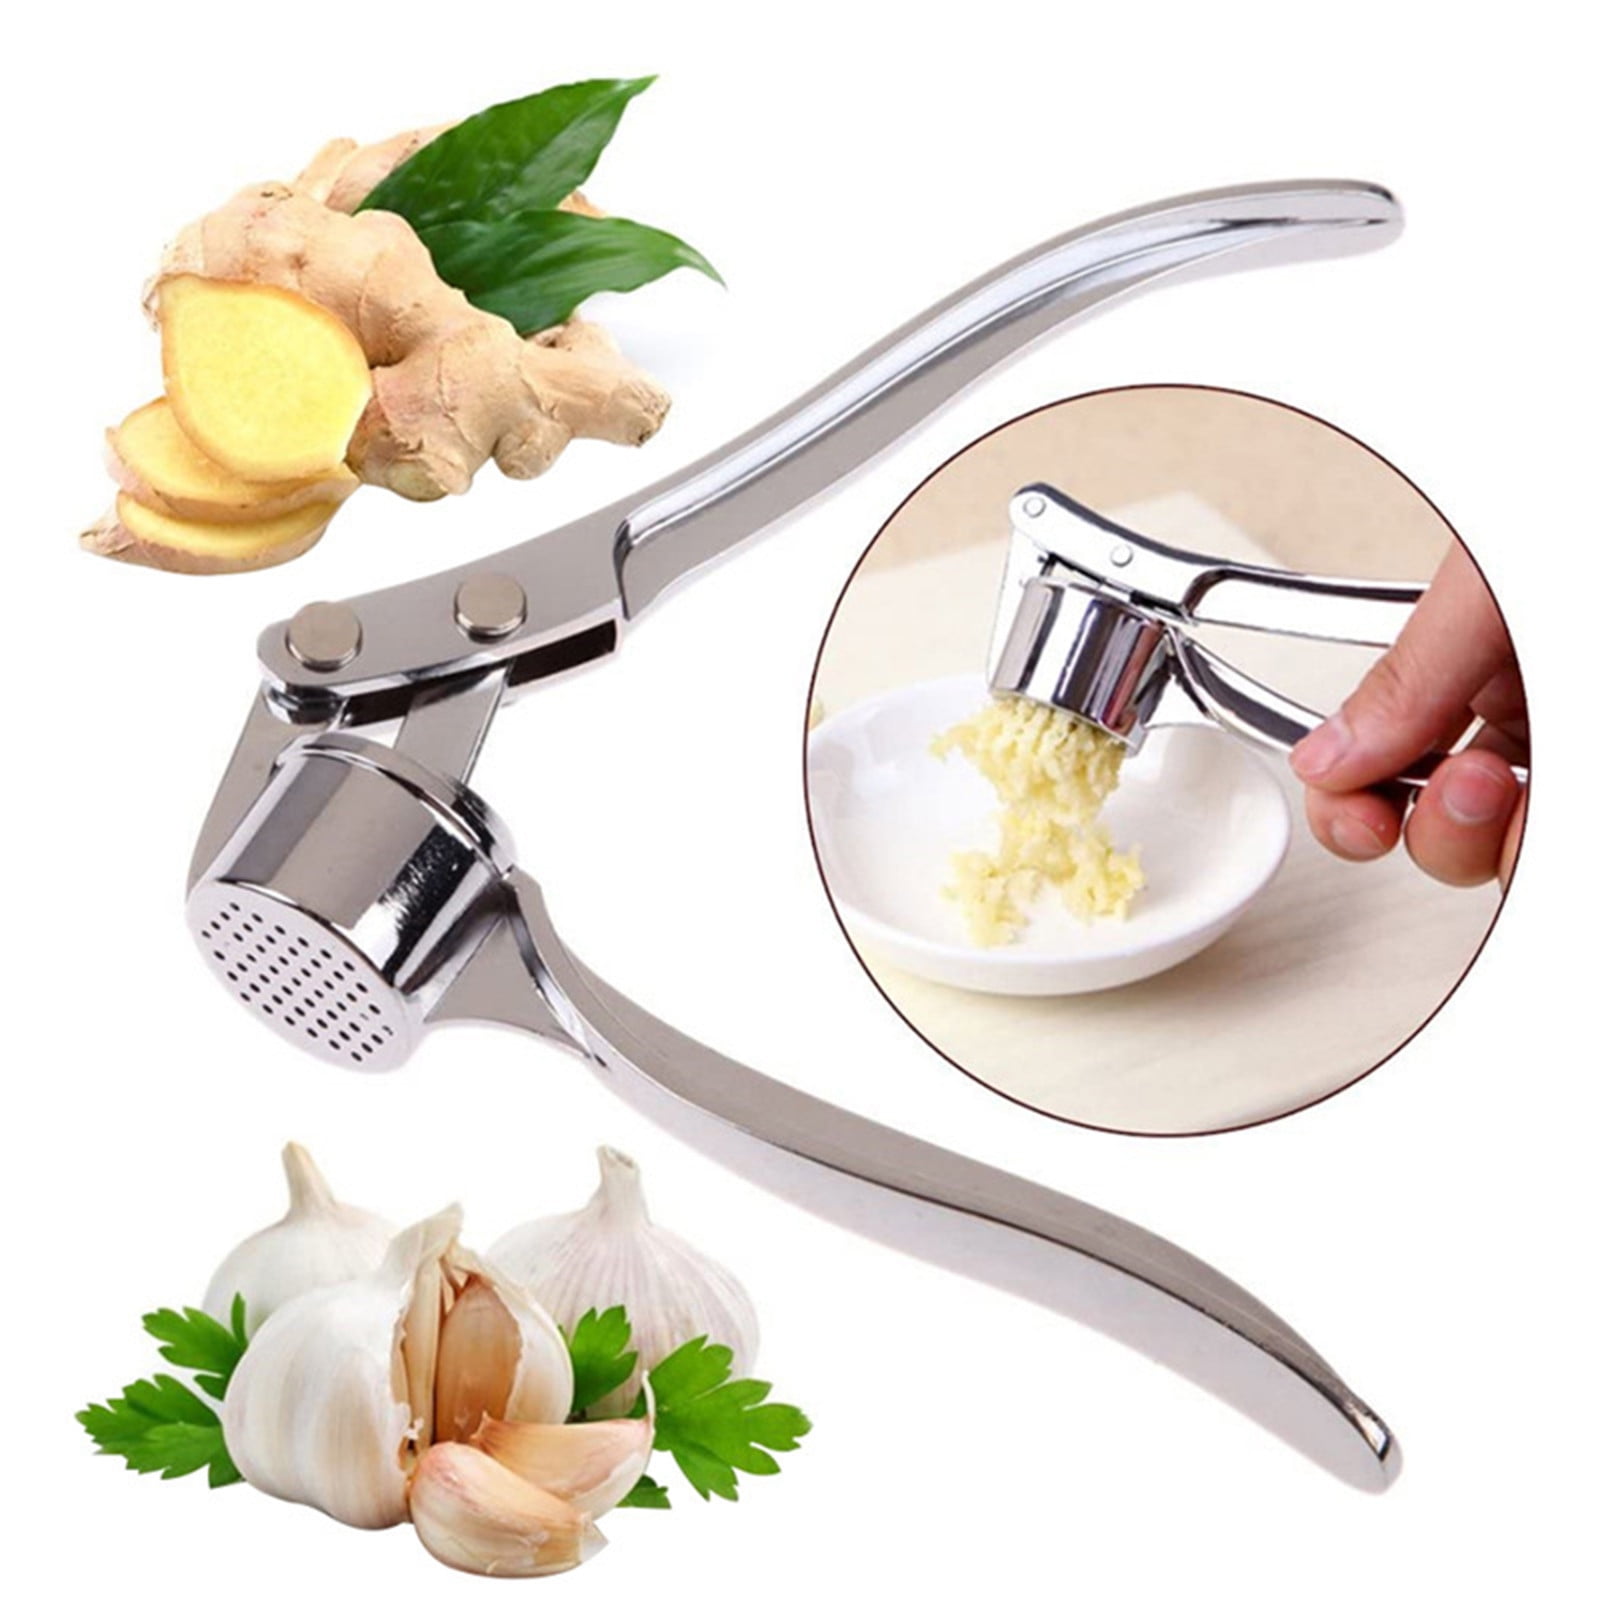 Tiitstoy Kitchen Stainless Steel Garlic Press Crusher Home Cooking Vegetables Ginger Squeezer Masher Handheld Ginger Garlic Mincer Tools, Size: 15.5 x